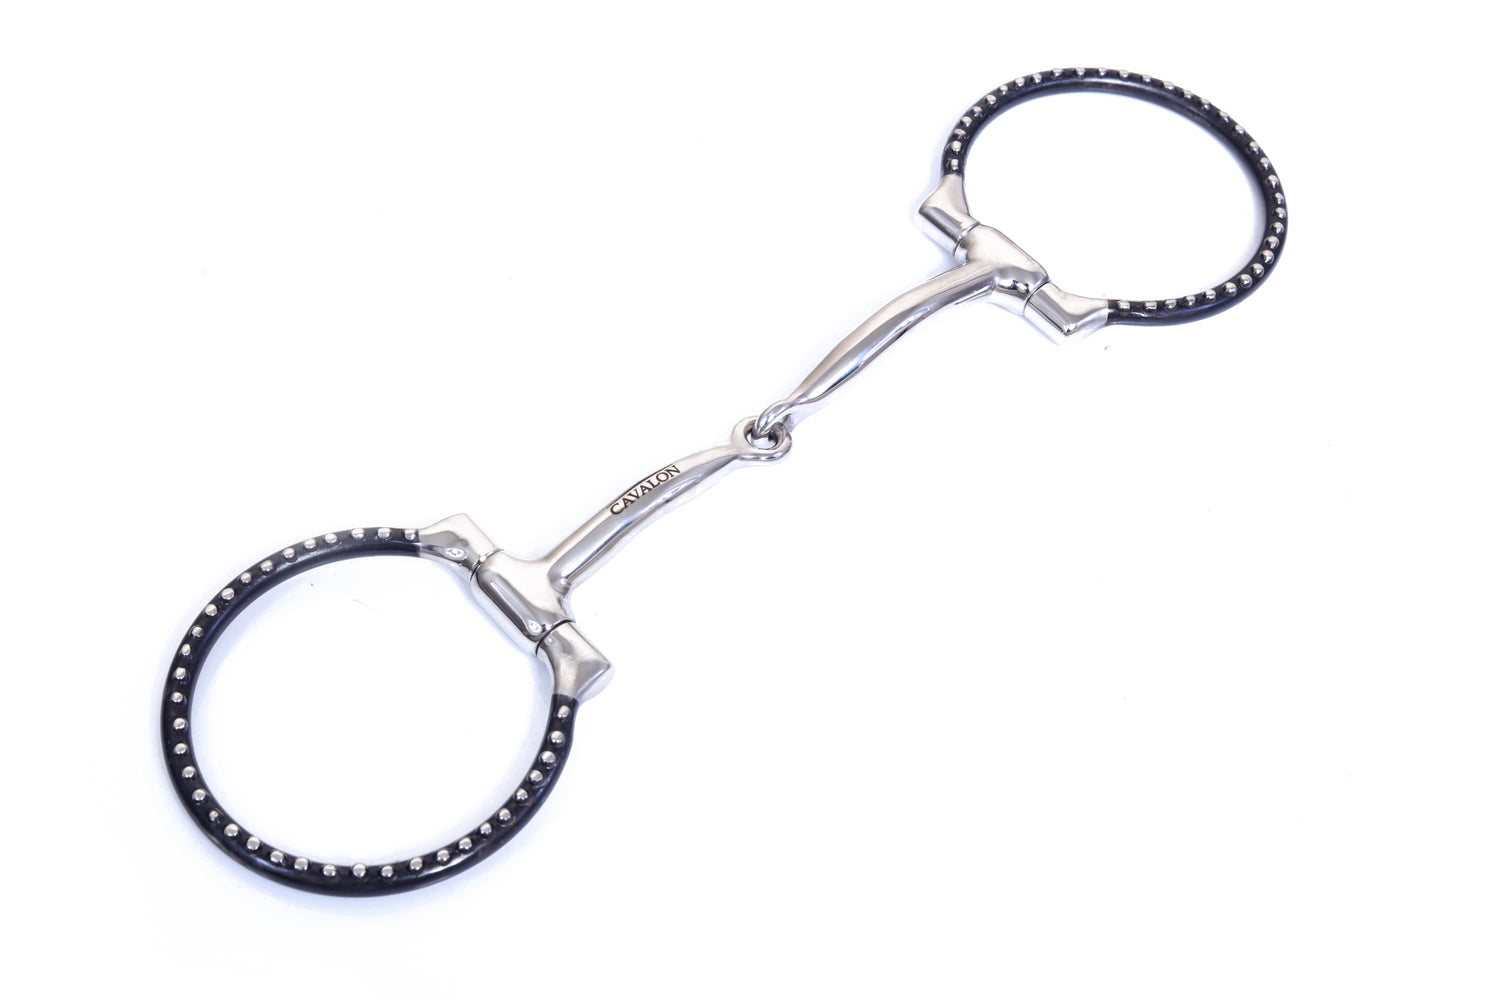 Western Silver Dotted D-Ring Snaffle Horse Bit with Copper Inlays